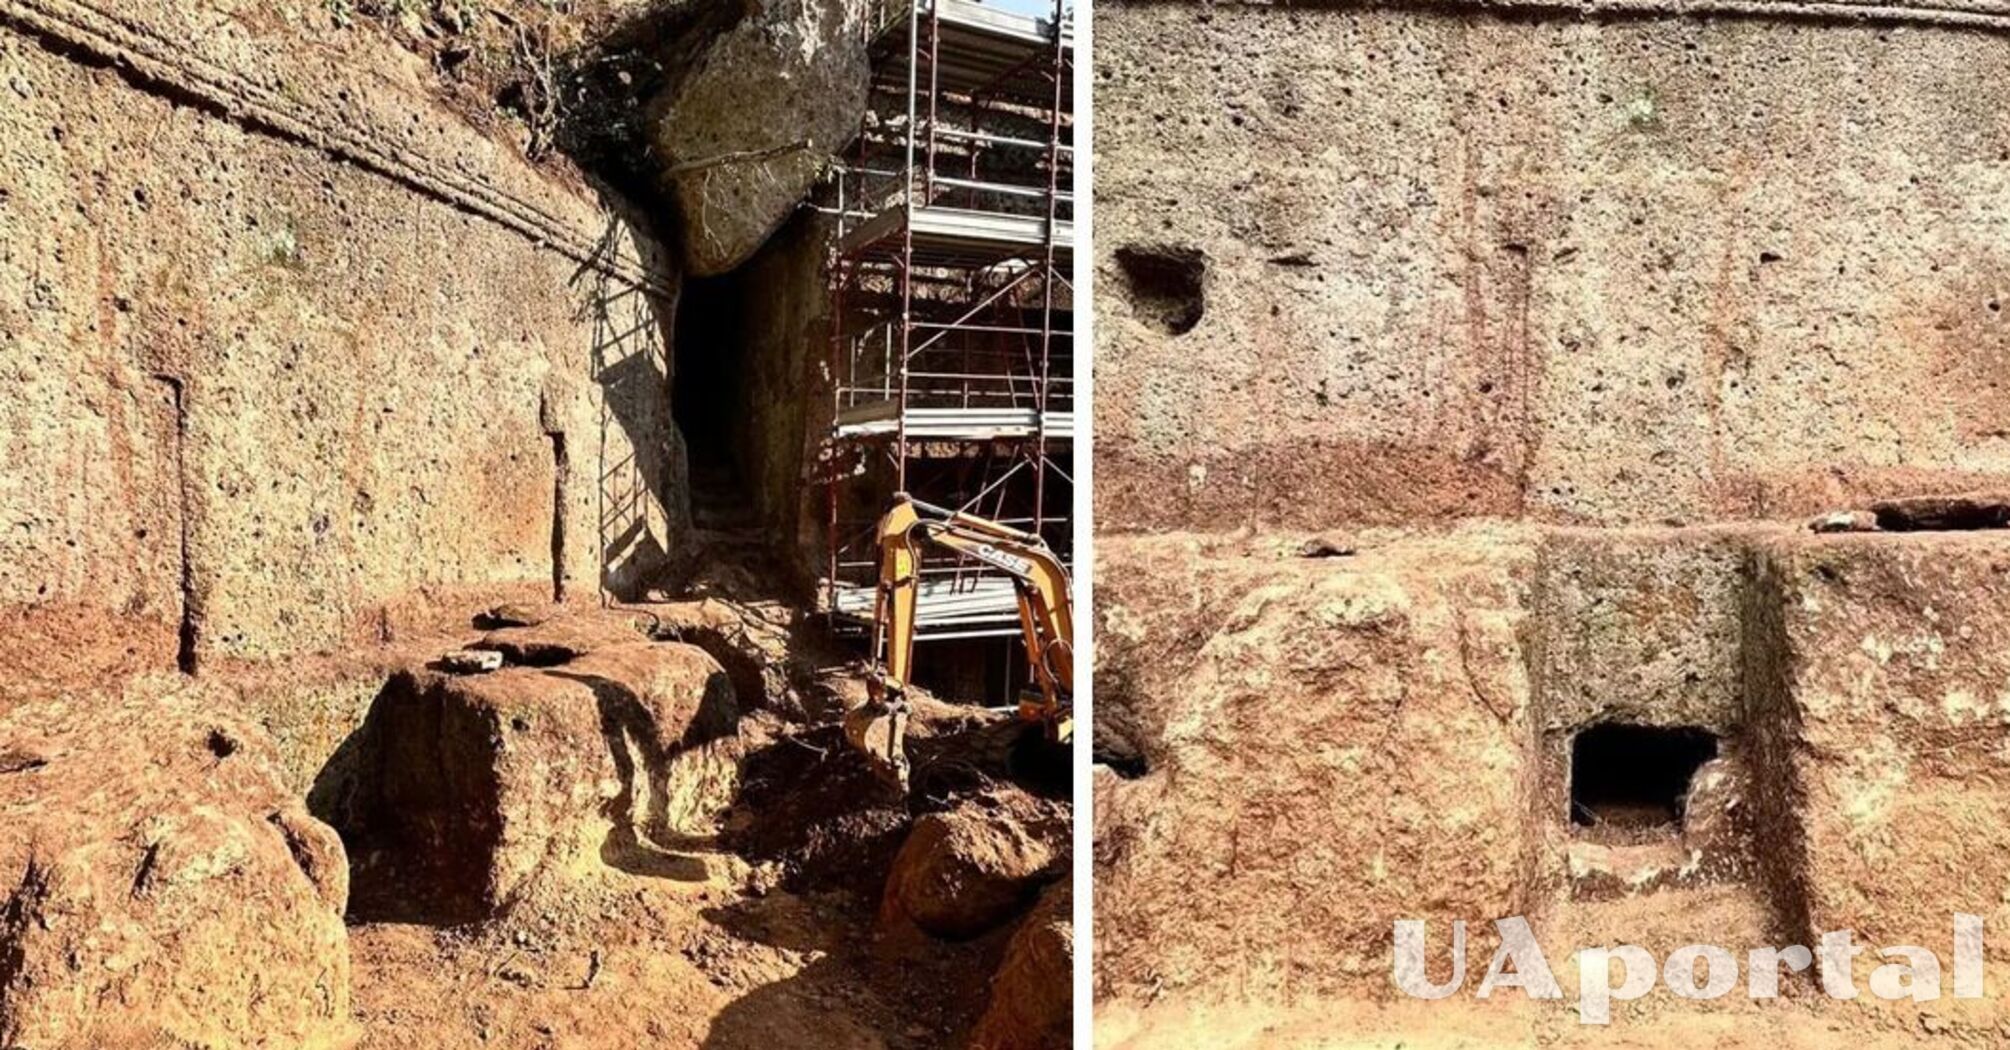 Tomb of Etruscan queen of the 5th century BC discovered in Italy